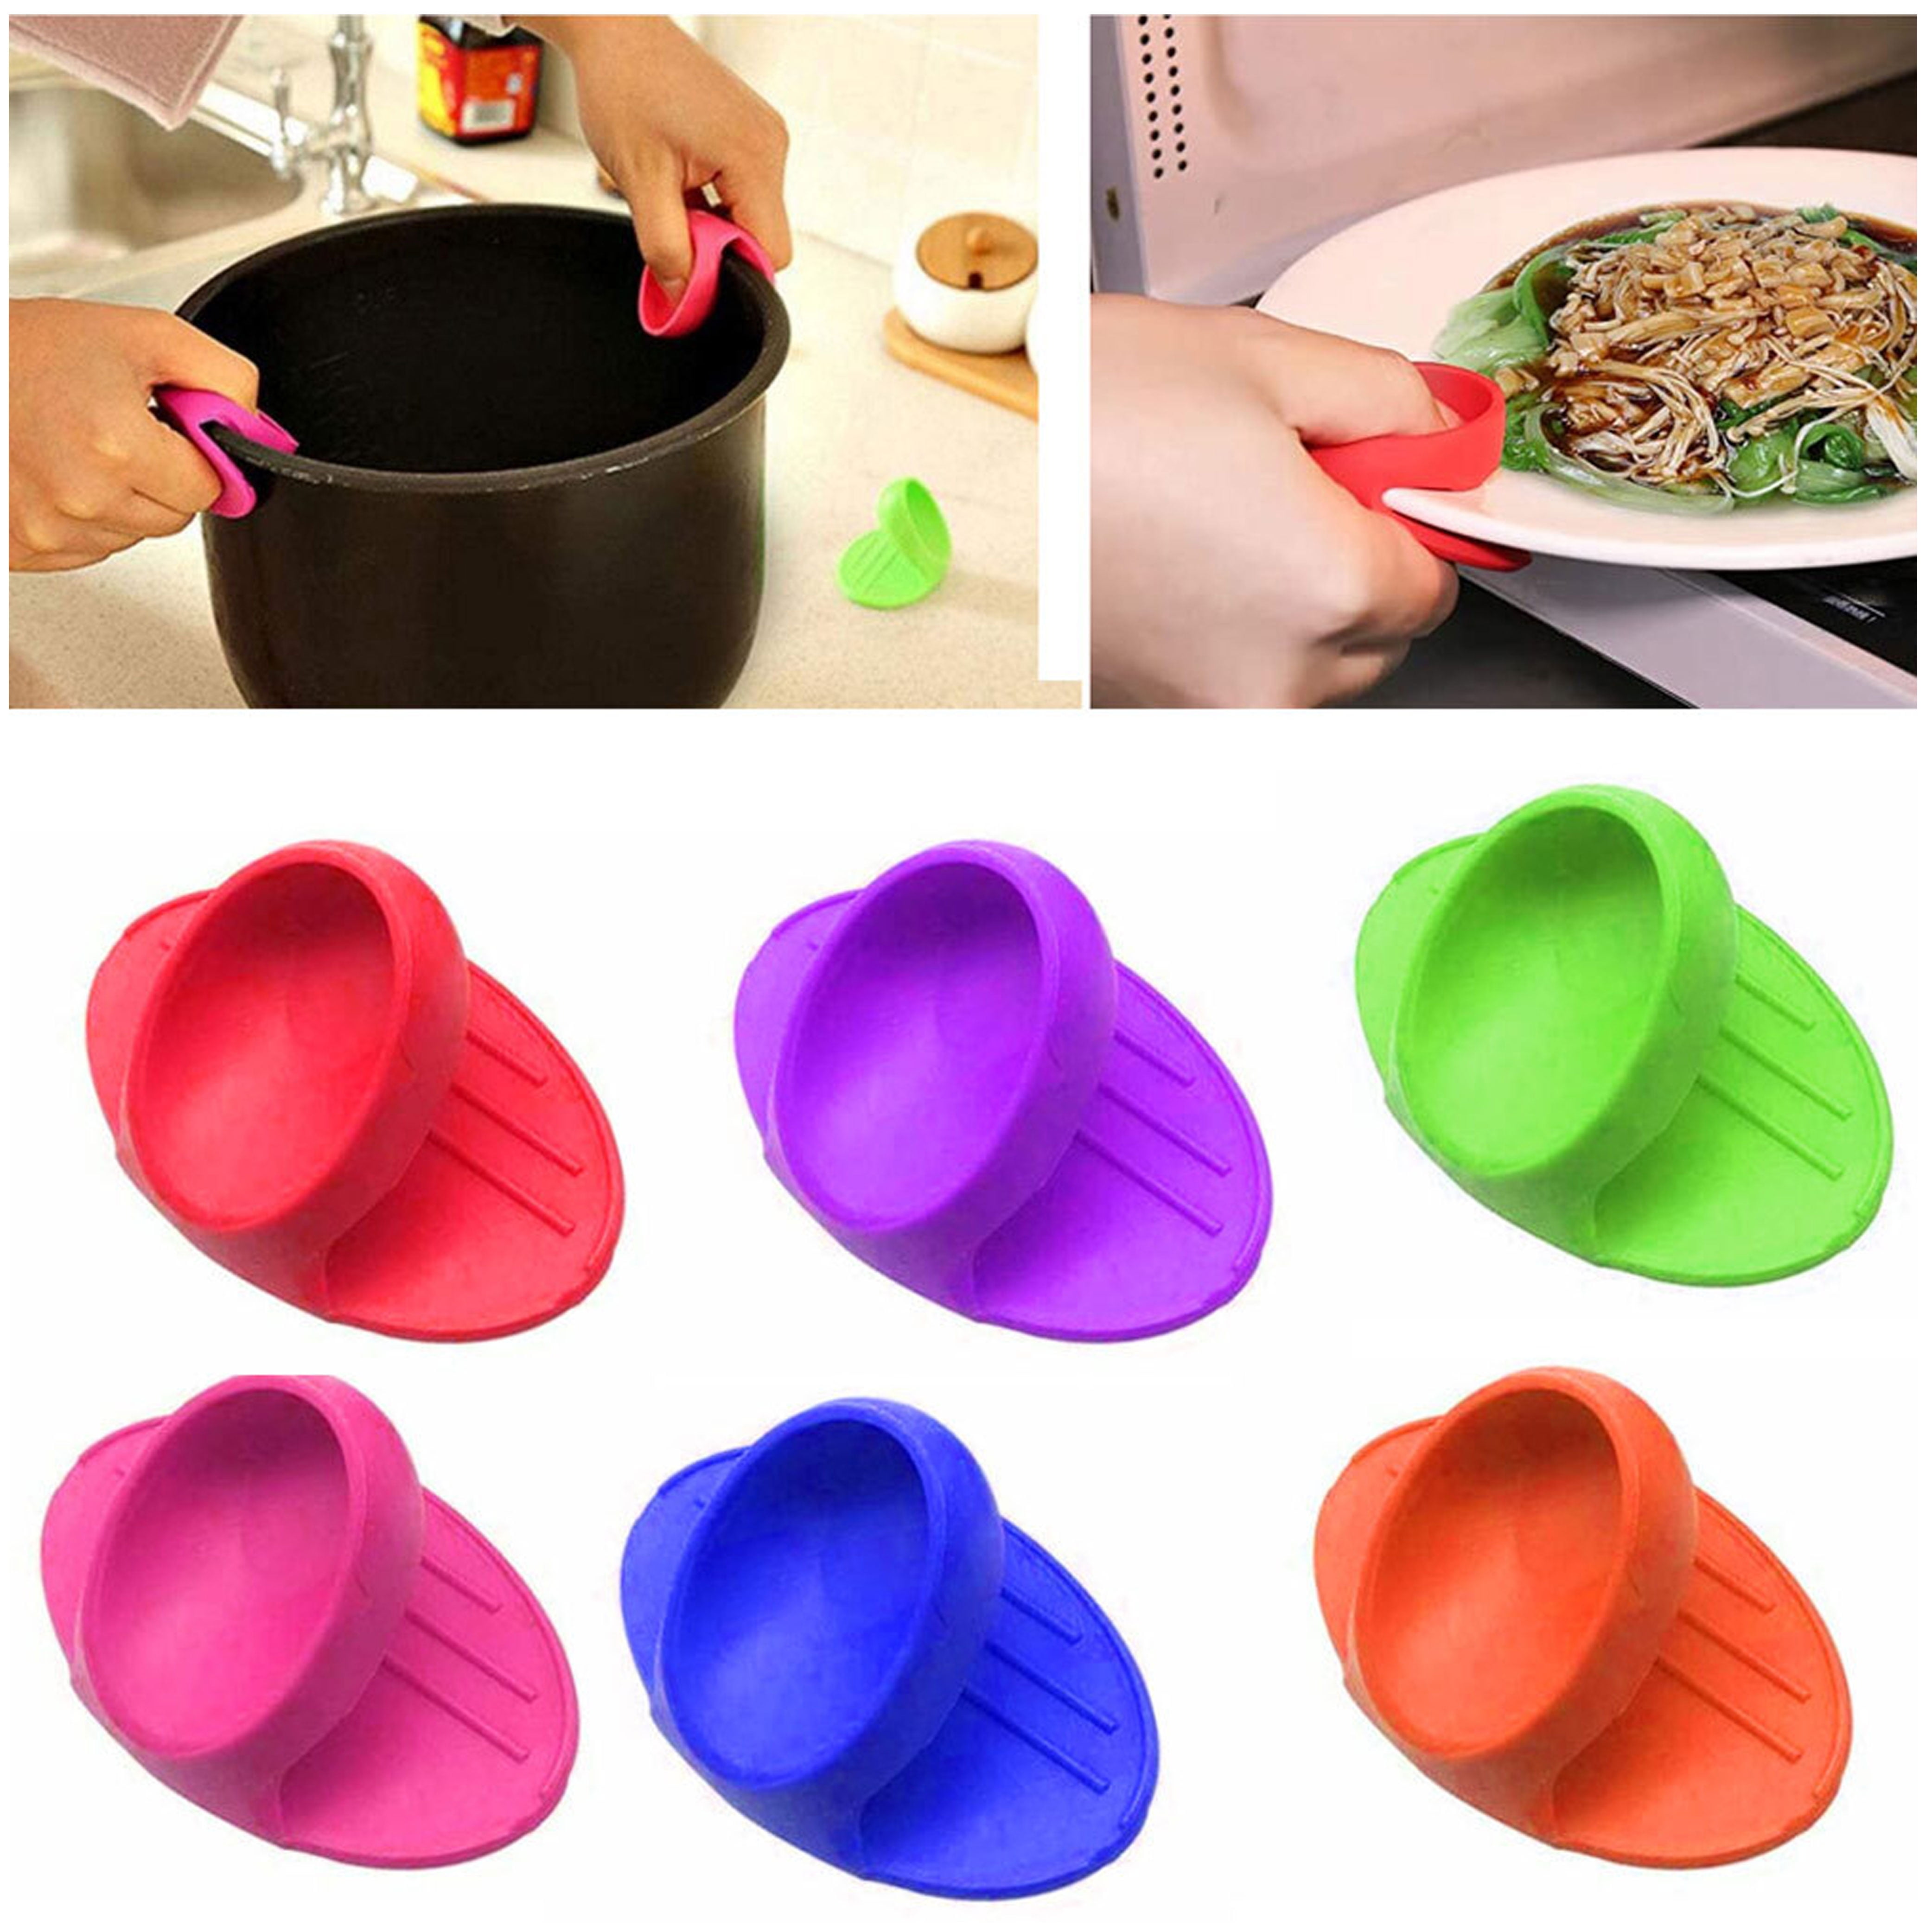 2 Pcs Green pinch grips Silicone Oven Gloves Cooking Hot Pot Holder 